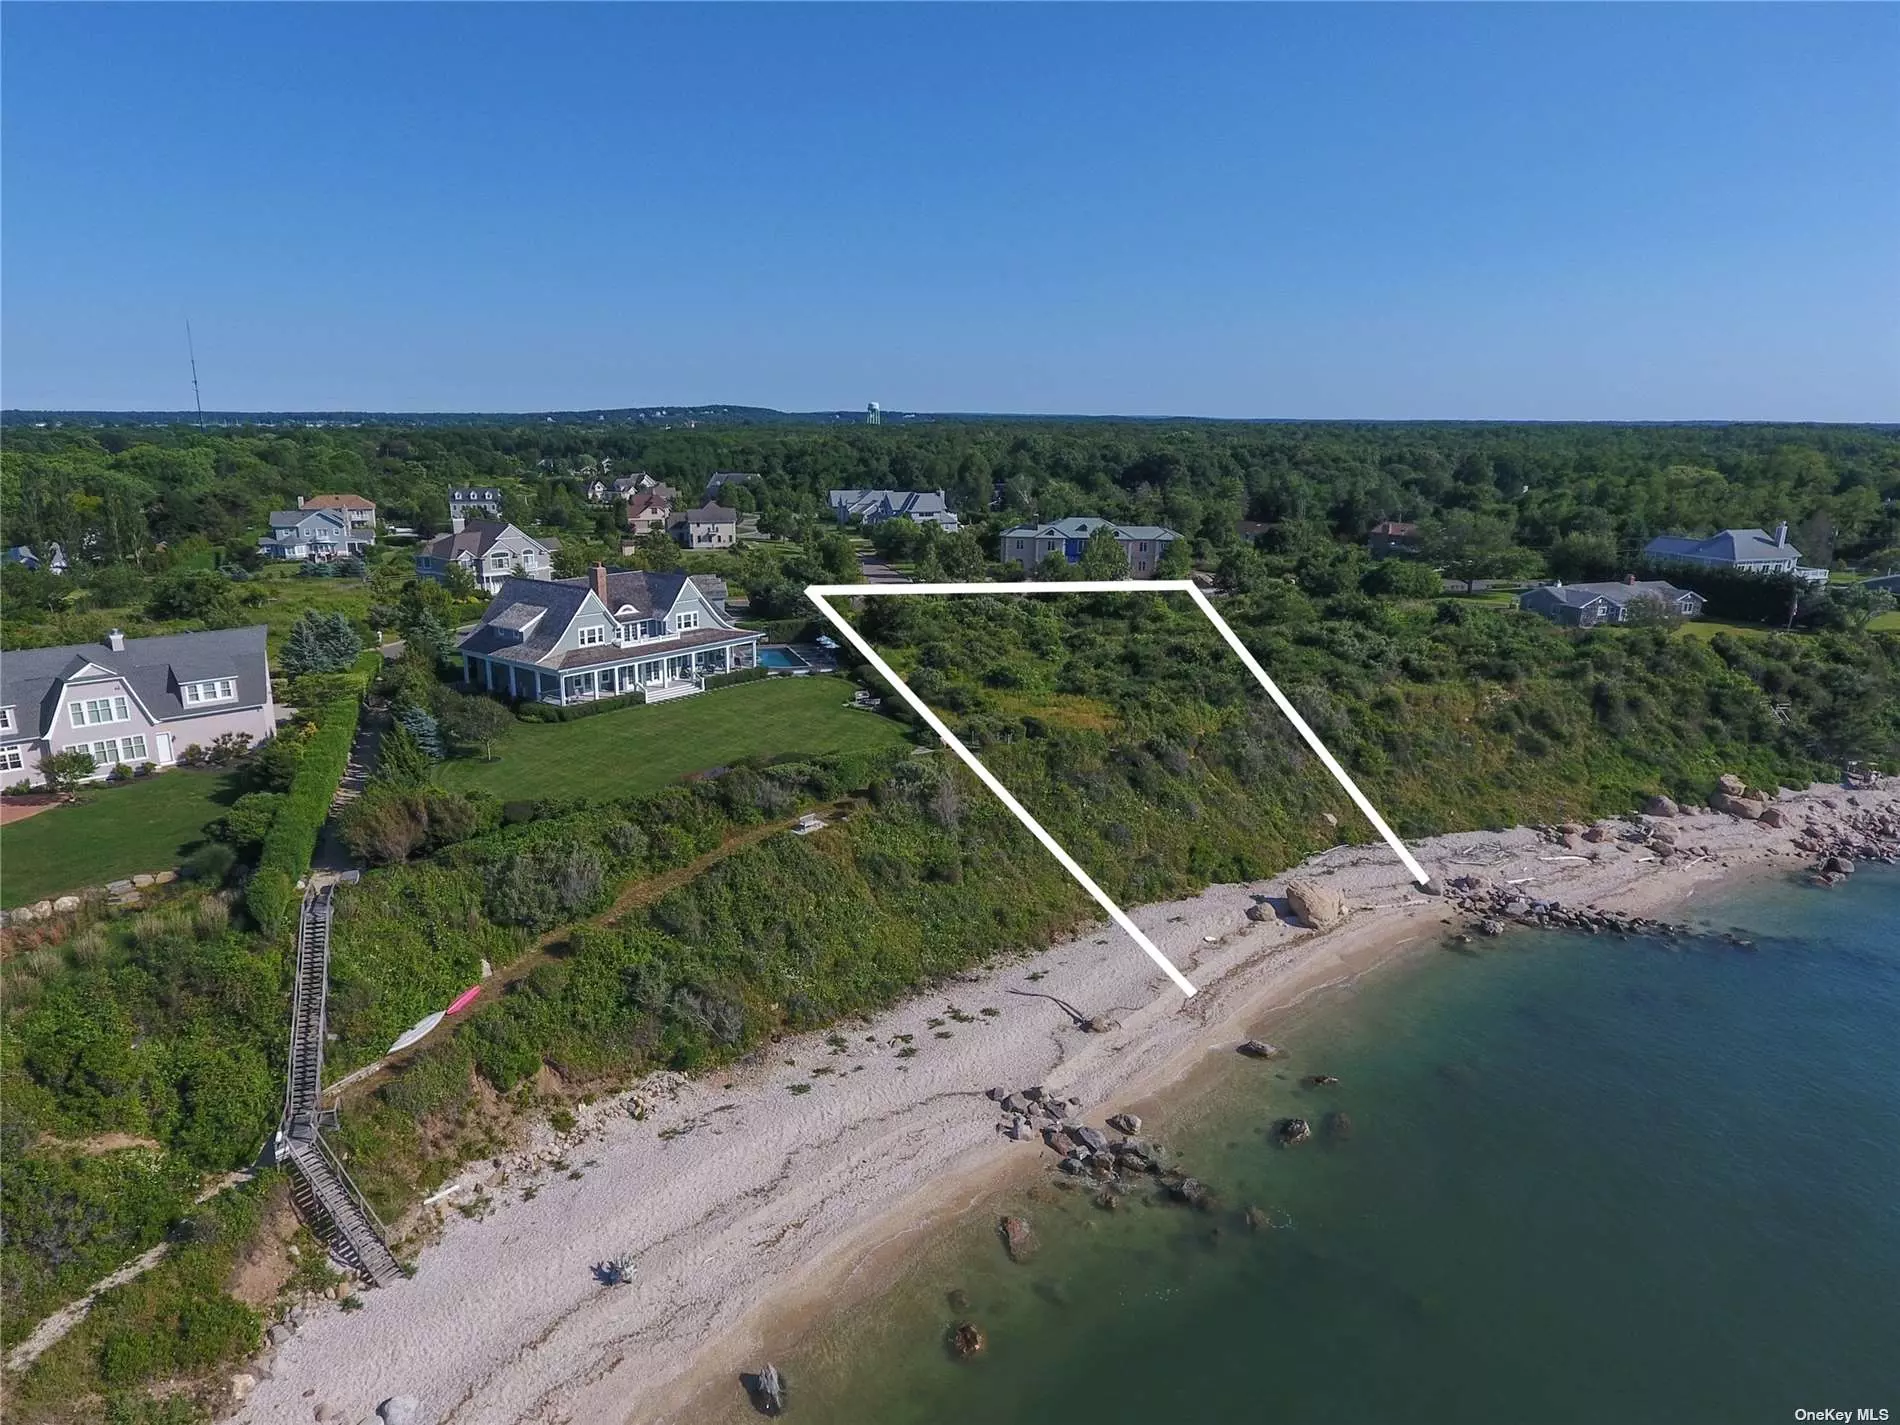 Greenport, Rock Cove Estates--One of only two sound front lots available in this premier, well-established community. 1.22 acres level parcel with sweeping water views across the LI Sound to the Connecticut shoreline. Extraordinary sunsets. 163 feet of private sound beach. Build the home of your dreams to enjoy the gentle sea breezes and the sound of waves hitting the shore. An enclave of beautiful homes amidst the bucolic North Fork Wine Country. Greenport Village is just a bike ride away. Vineyards, farm stands, shops and restaurants. A prime location that has it all. This is it, and it&rsquo;s waiting for you.